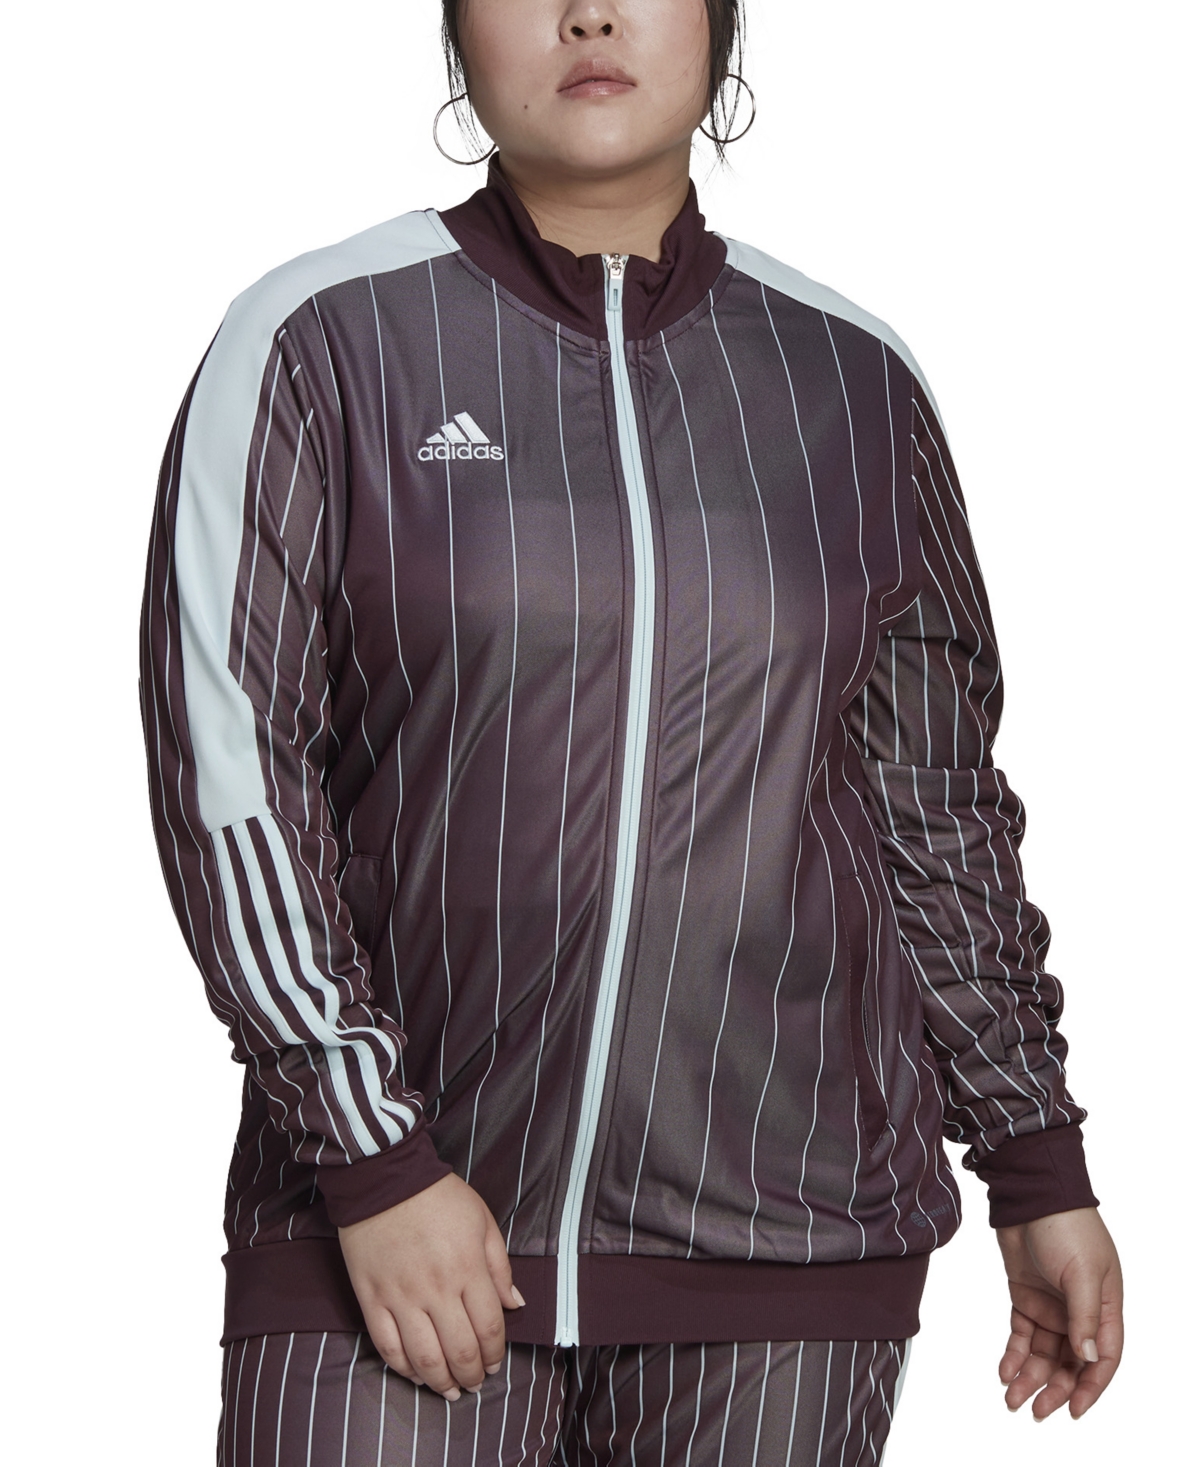 adidas Women's Striped Zip-Front Long-Sleeve Track Jacket